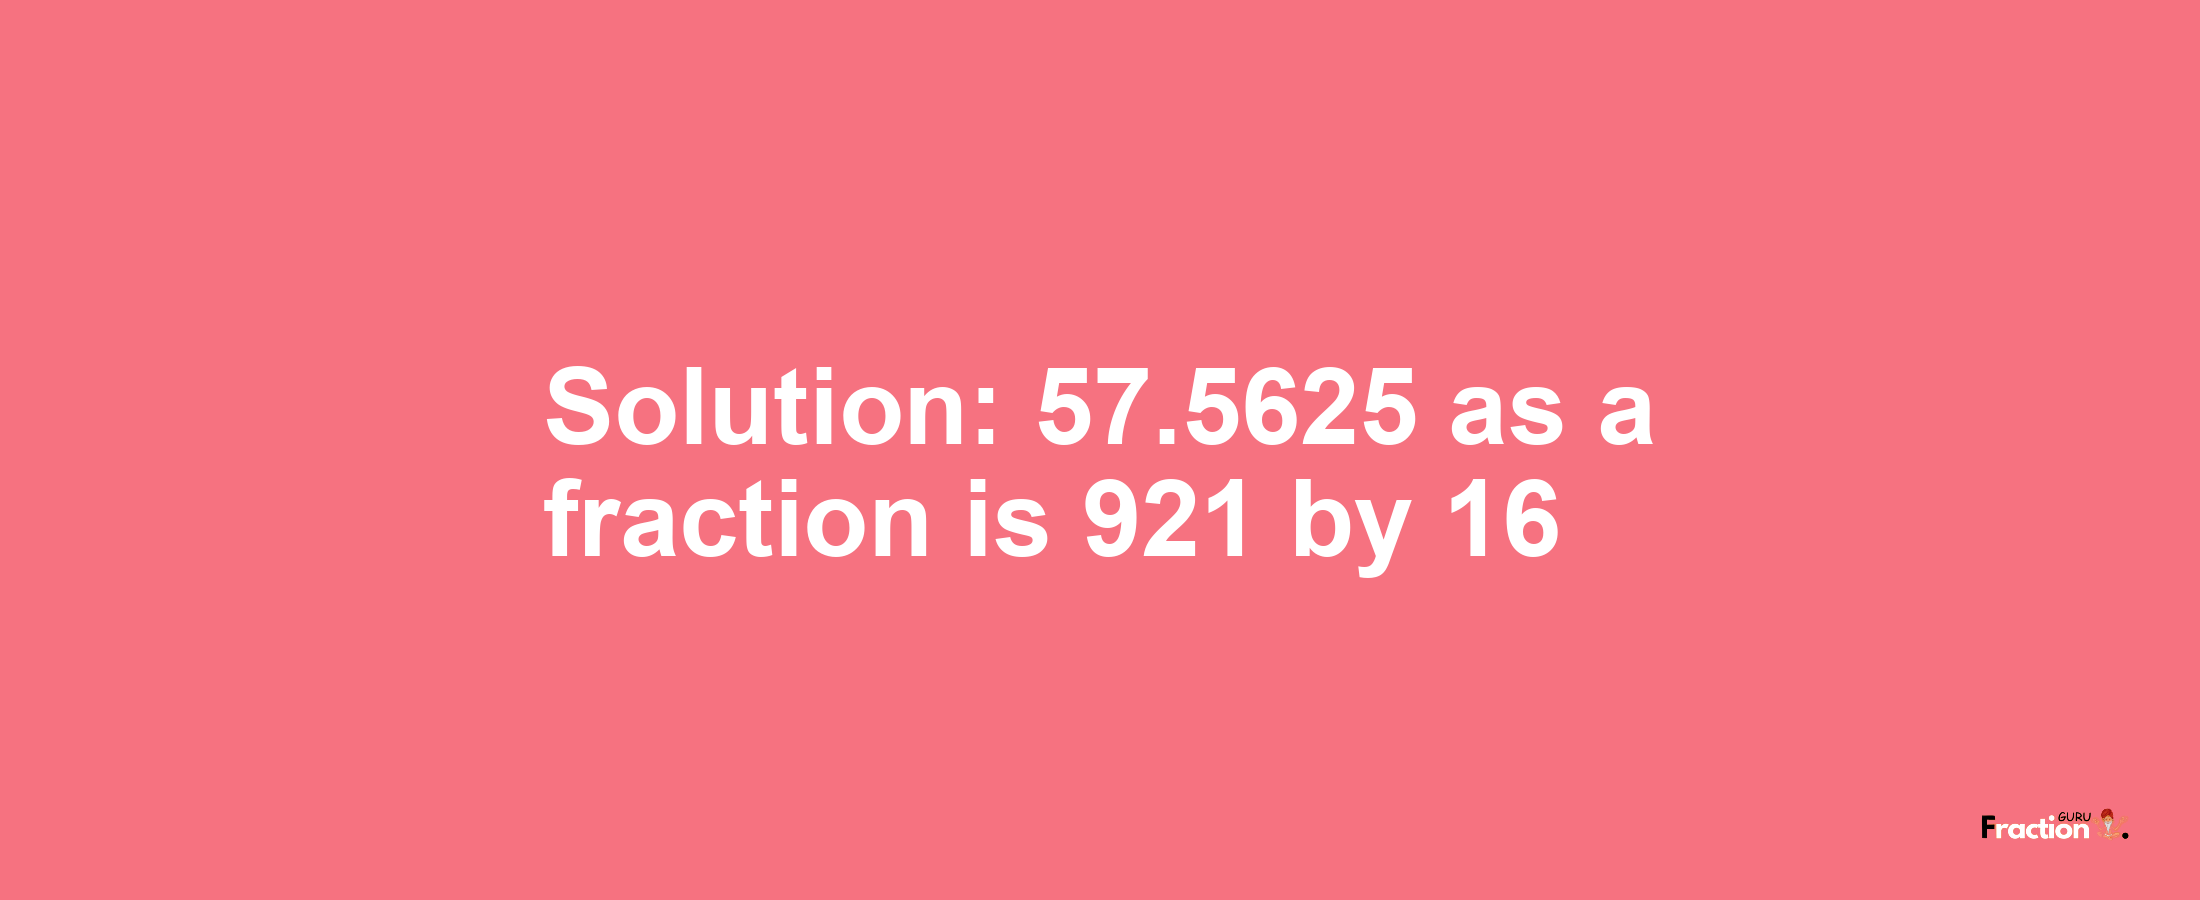 Solution:57.5625 as a fraction is 921/16